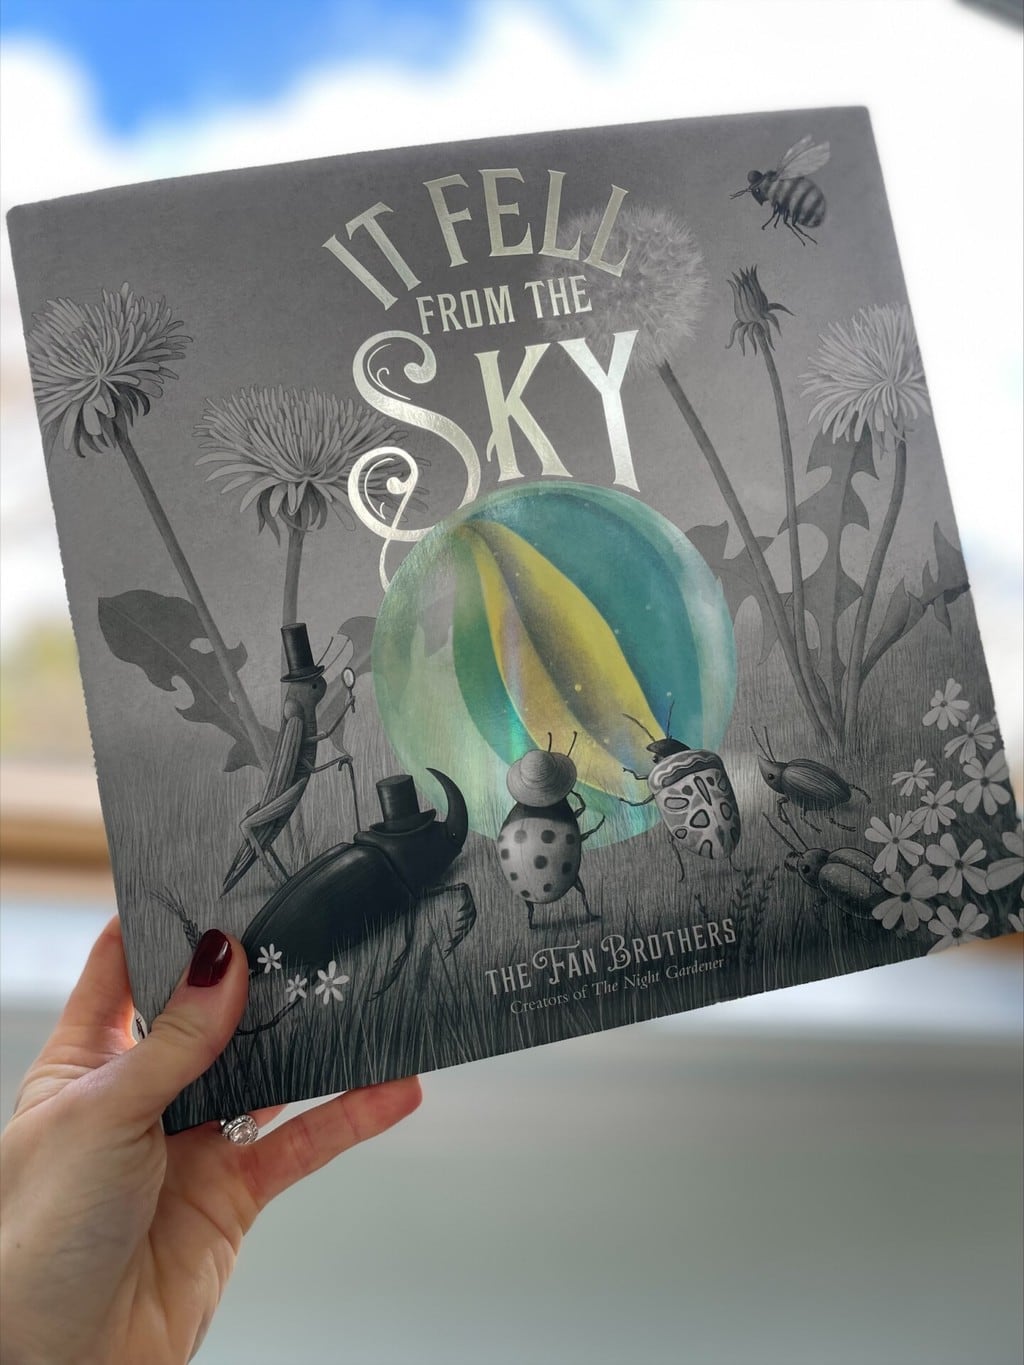 It Fell from the Sky – The Fan Brothers (authors), Frances Lincoln Children’s Books (imprint of Quarto Group) (publishers)